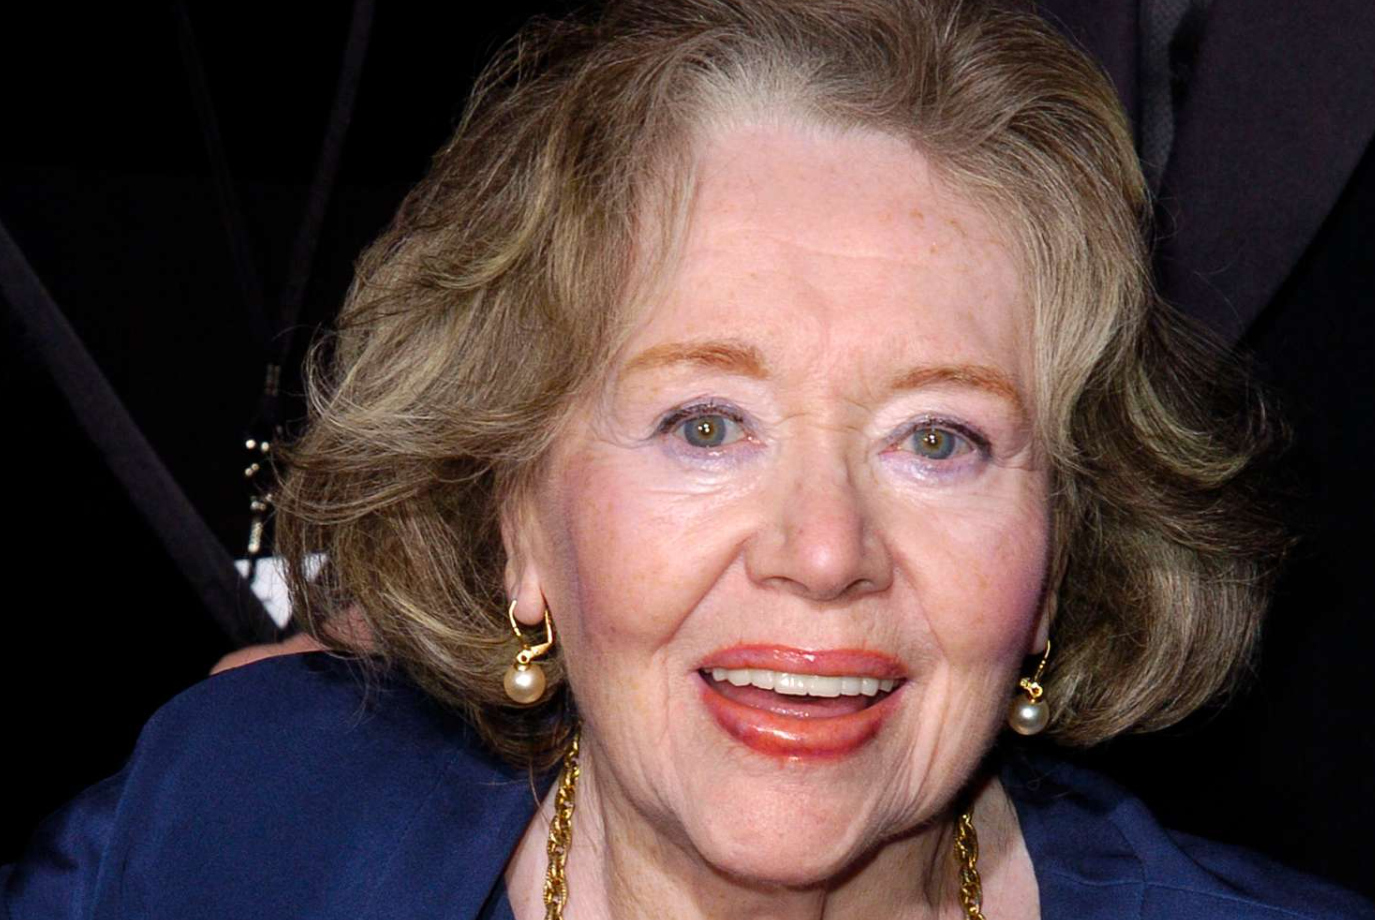 Glynis Johns, Beloved Mary Poppins Actress, Dies At 100